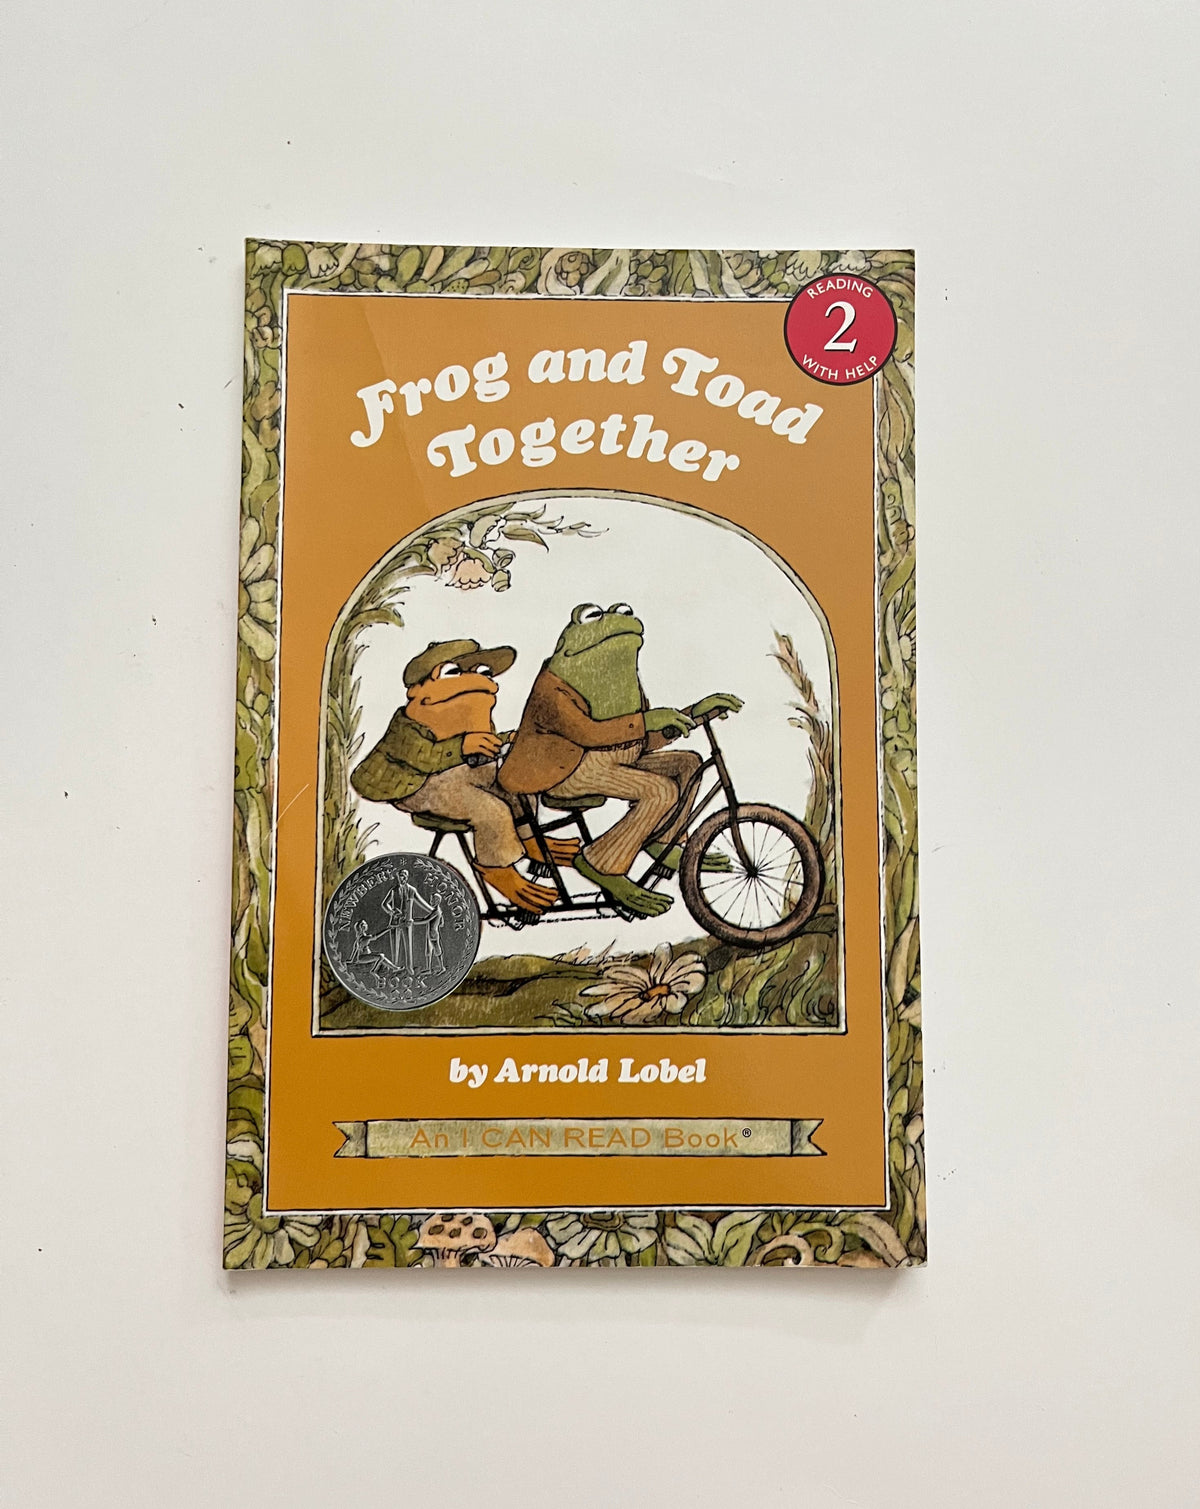 DONATE: Frog and Toad Together by Arnold Lobel